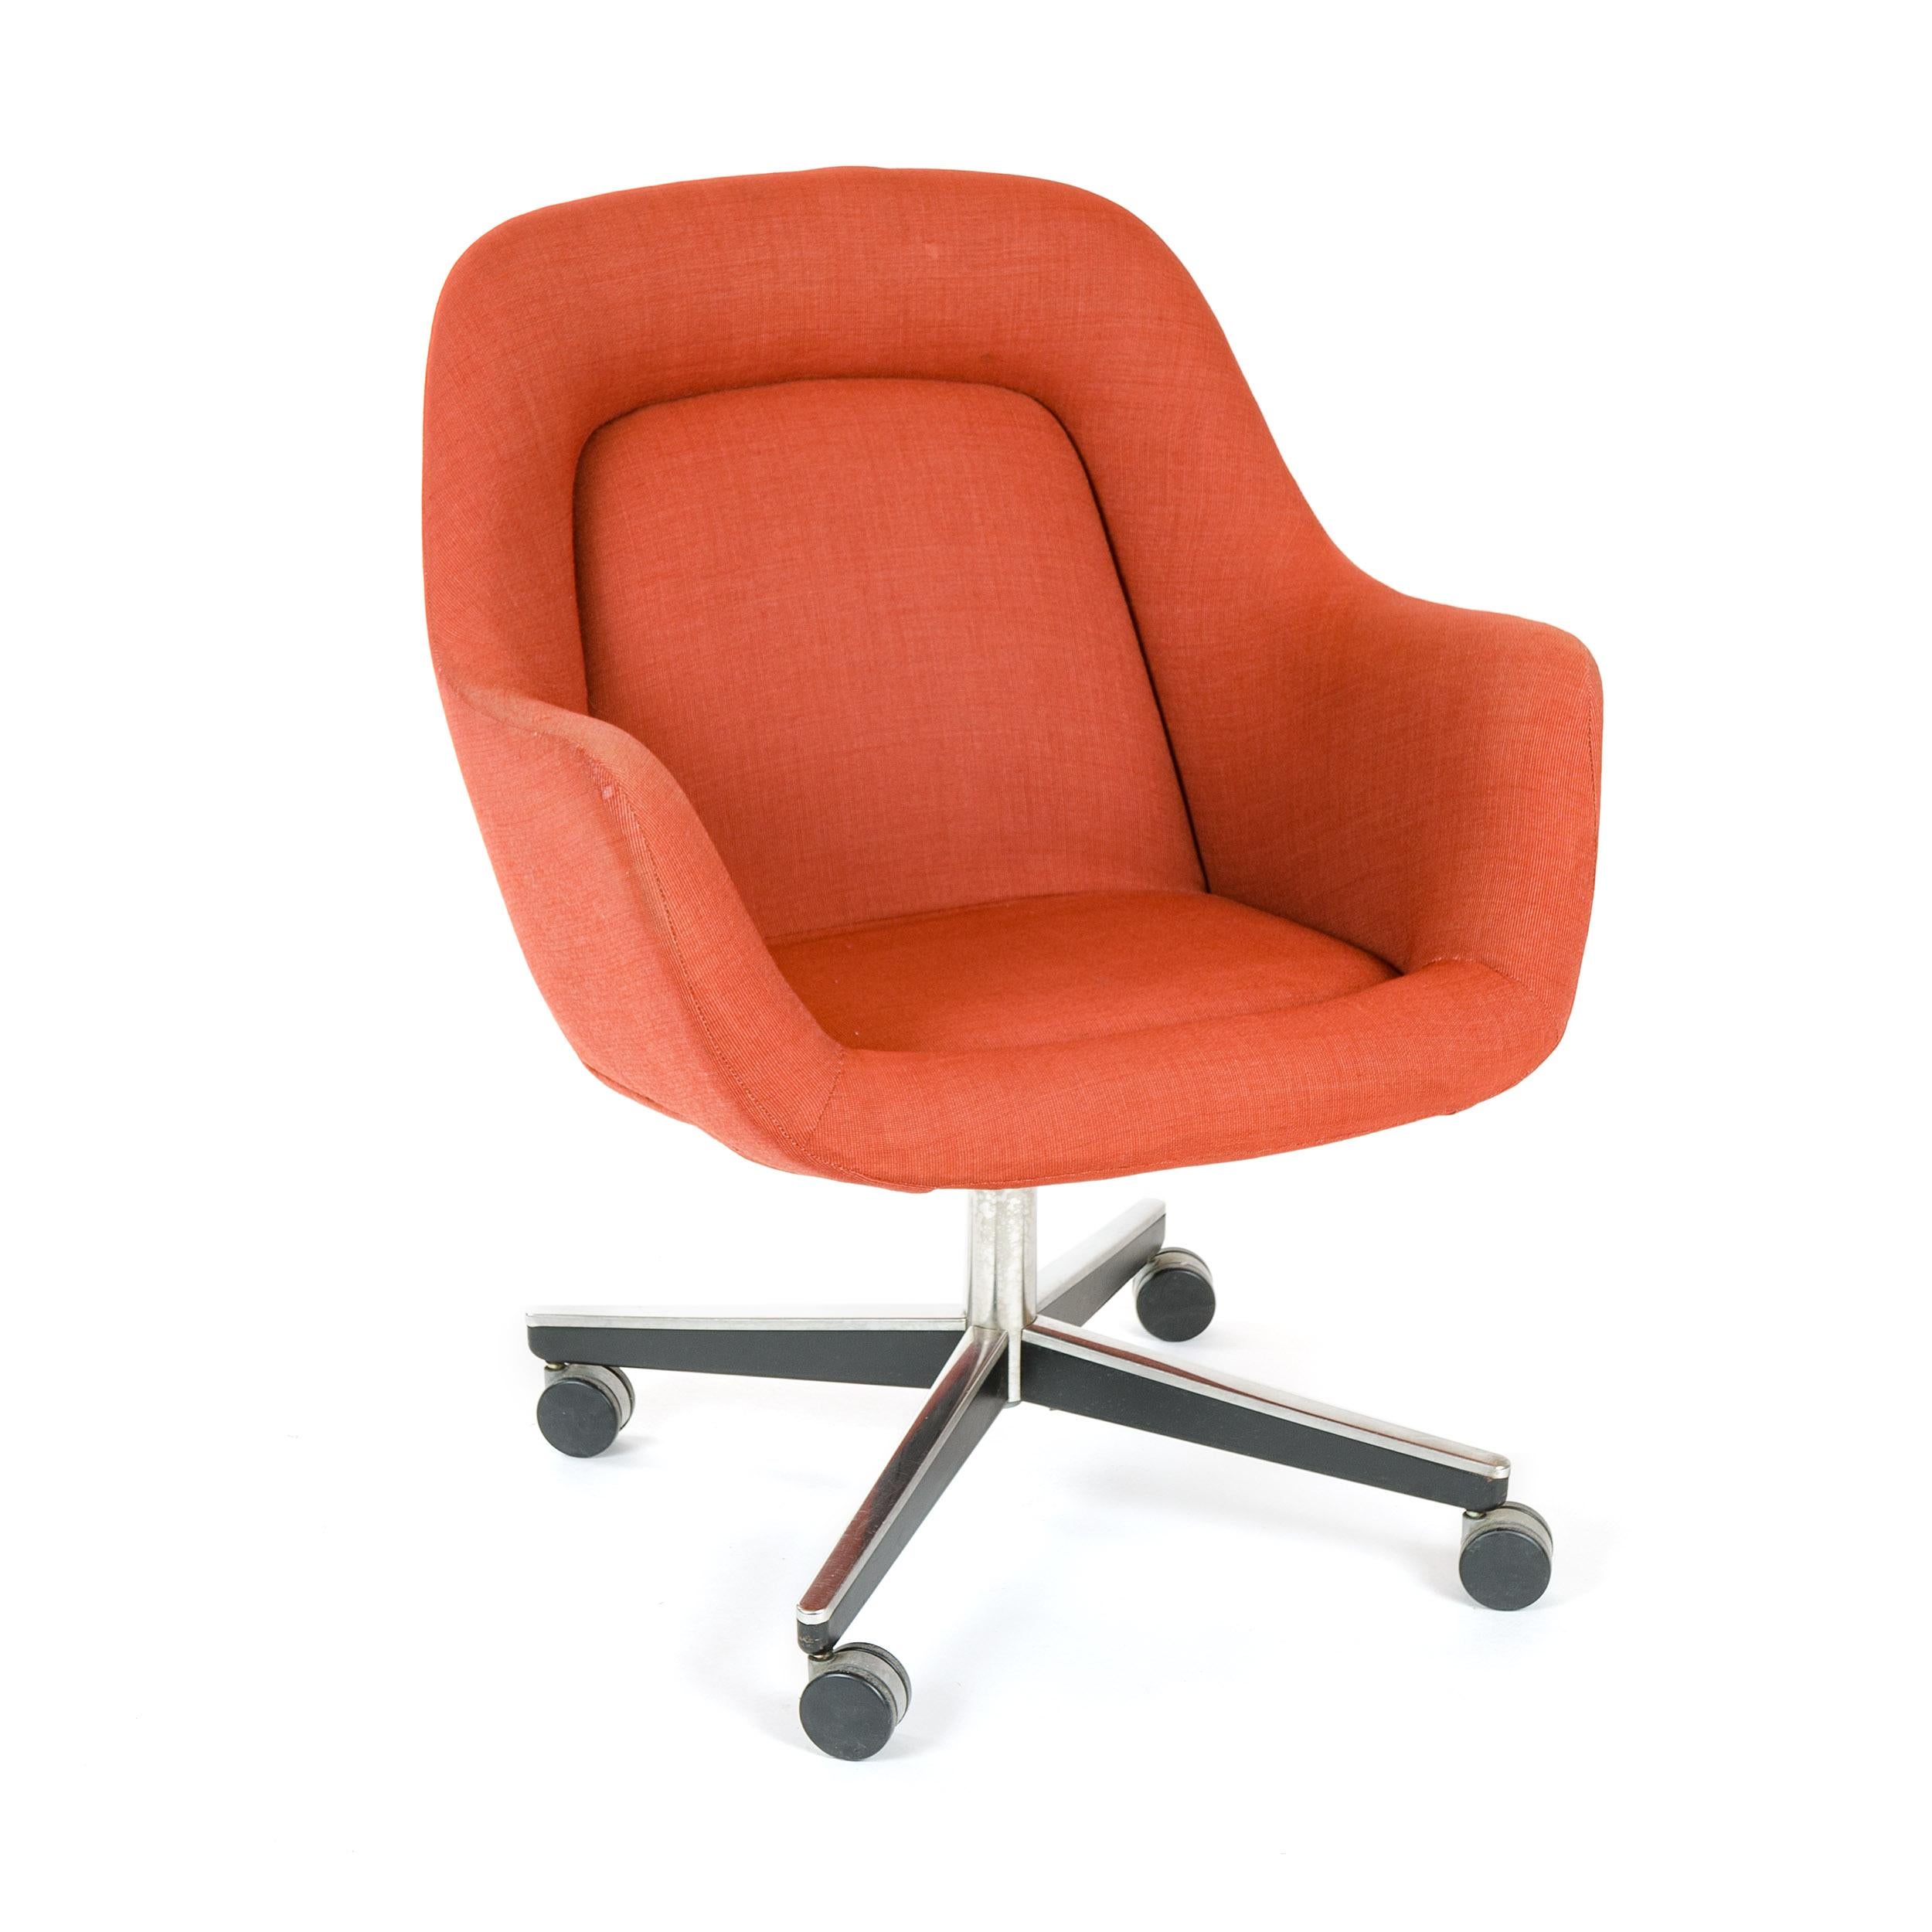 A desk chair with the original channel-stitched upholstery, on an X-form caster base.
   